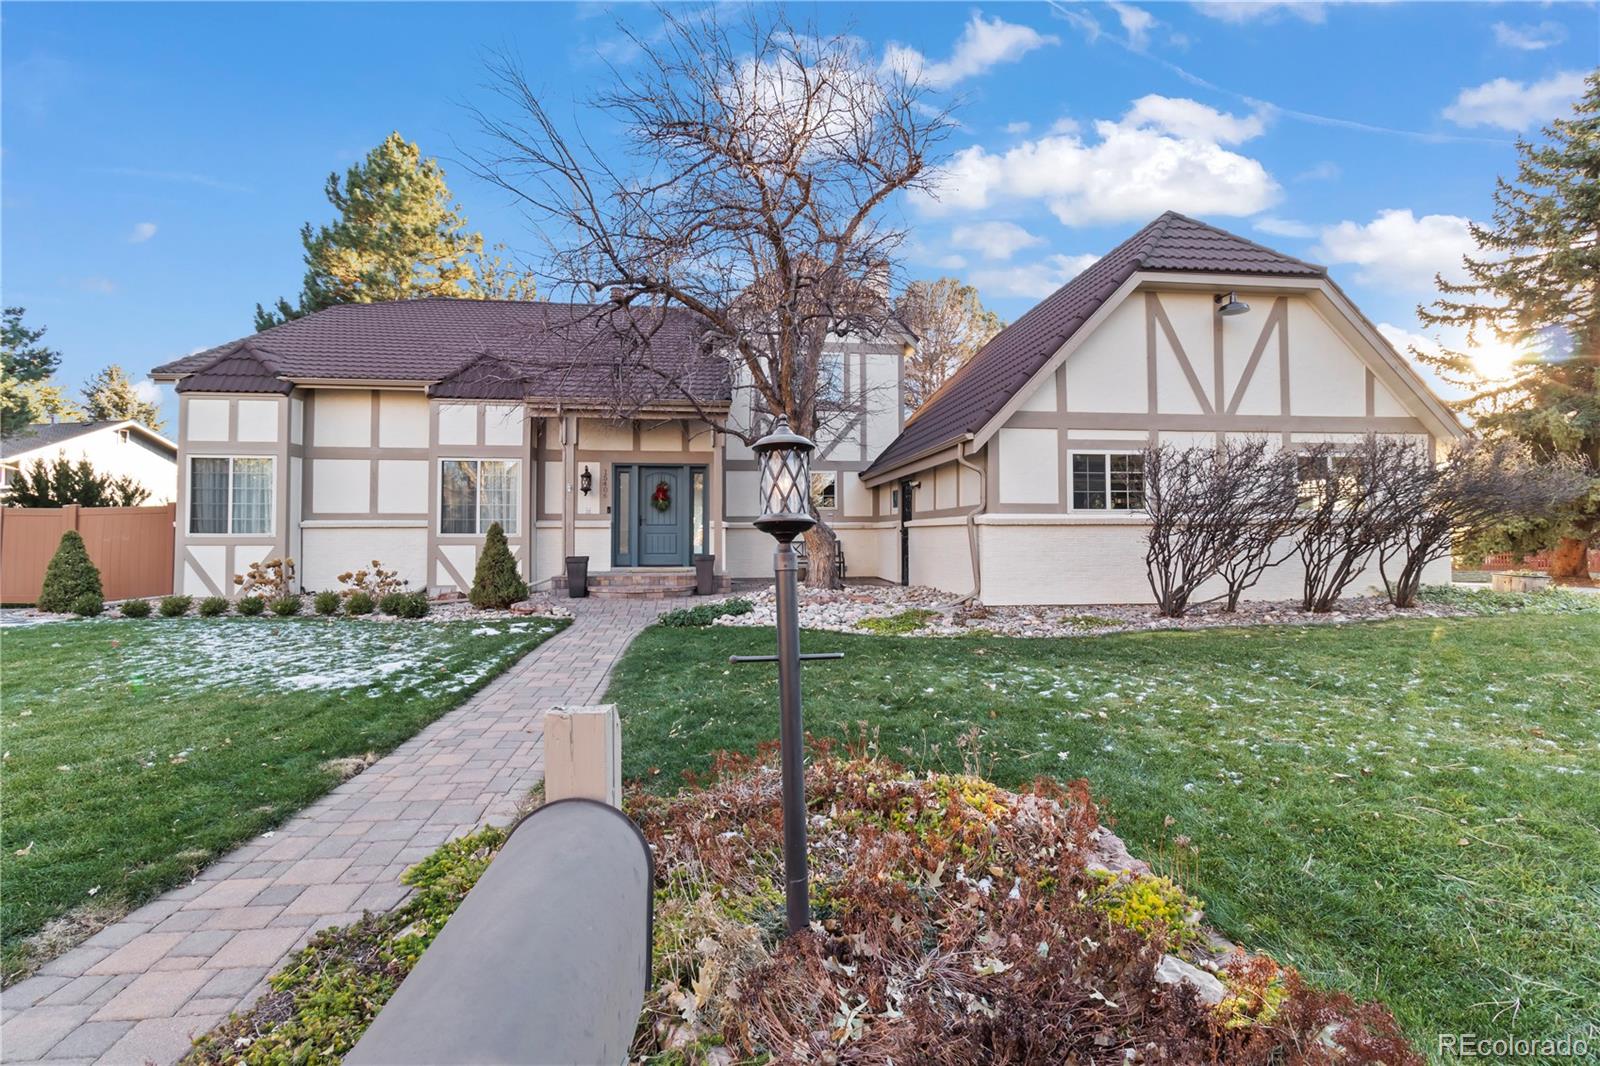 15406 e monmouth place, aurora sold home. Closed on 2024-04-16 for $930,000.